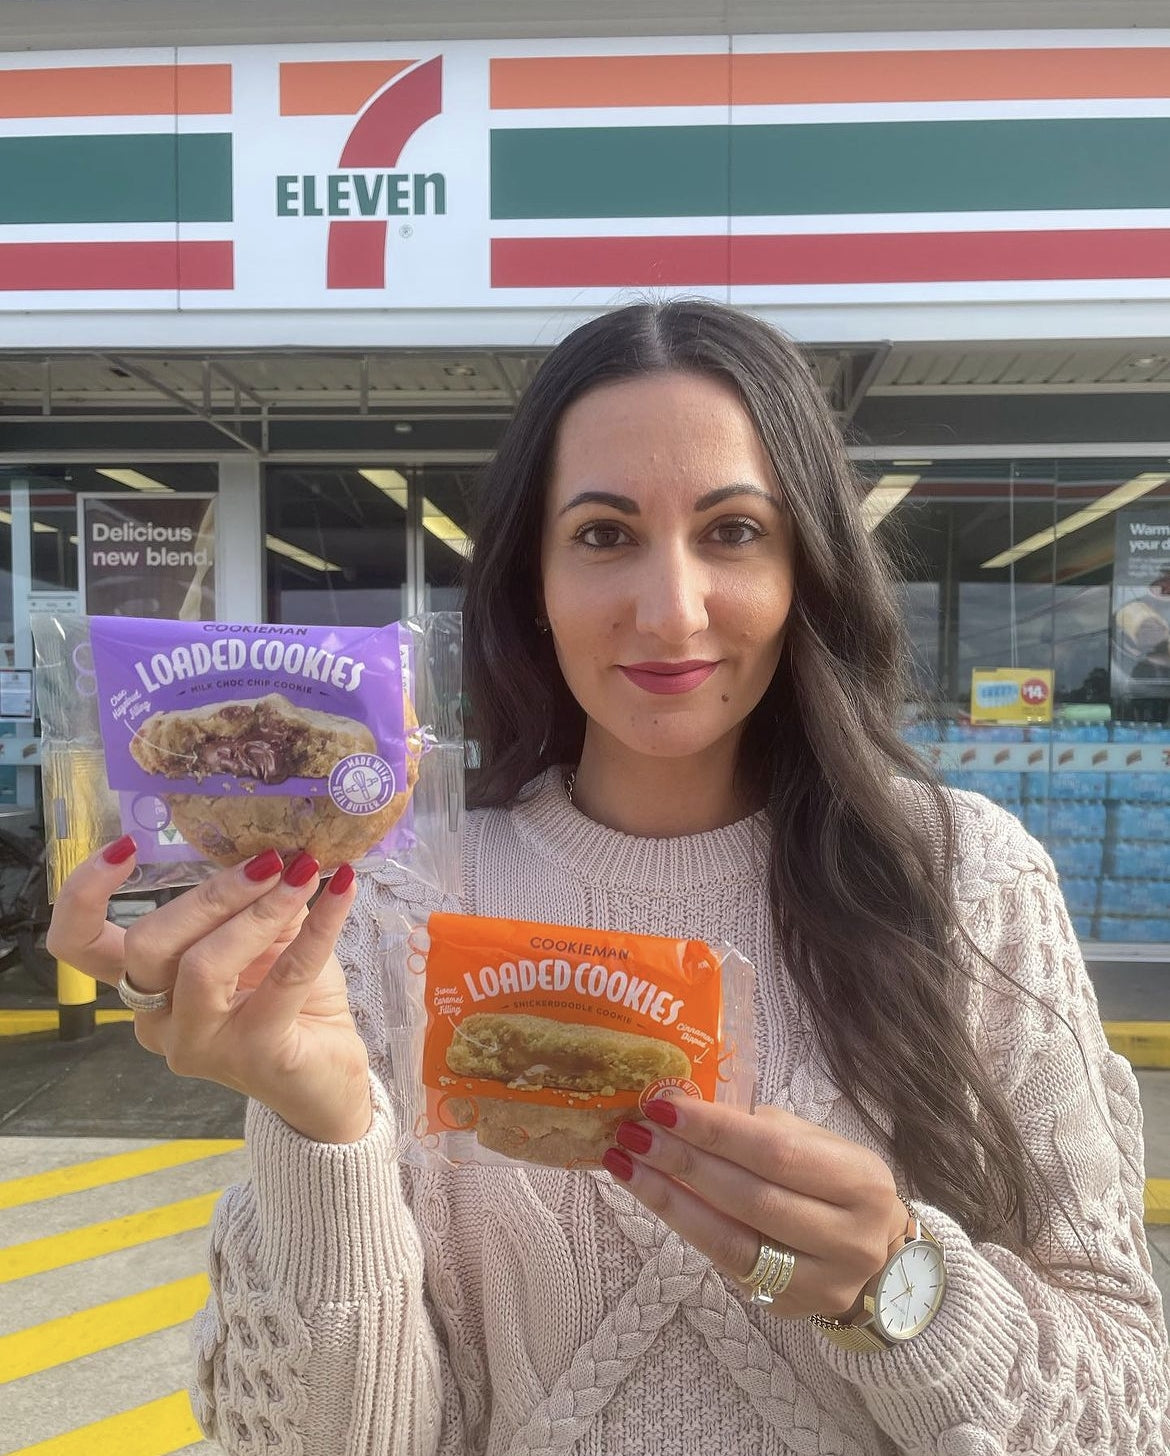 Loaded Cookies Available at 7-Eleven Australia